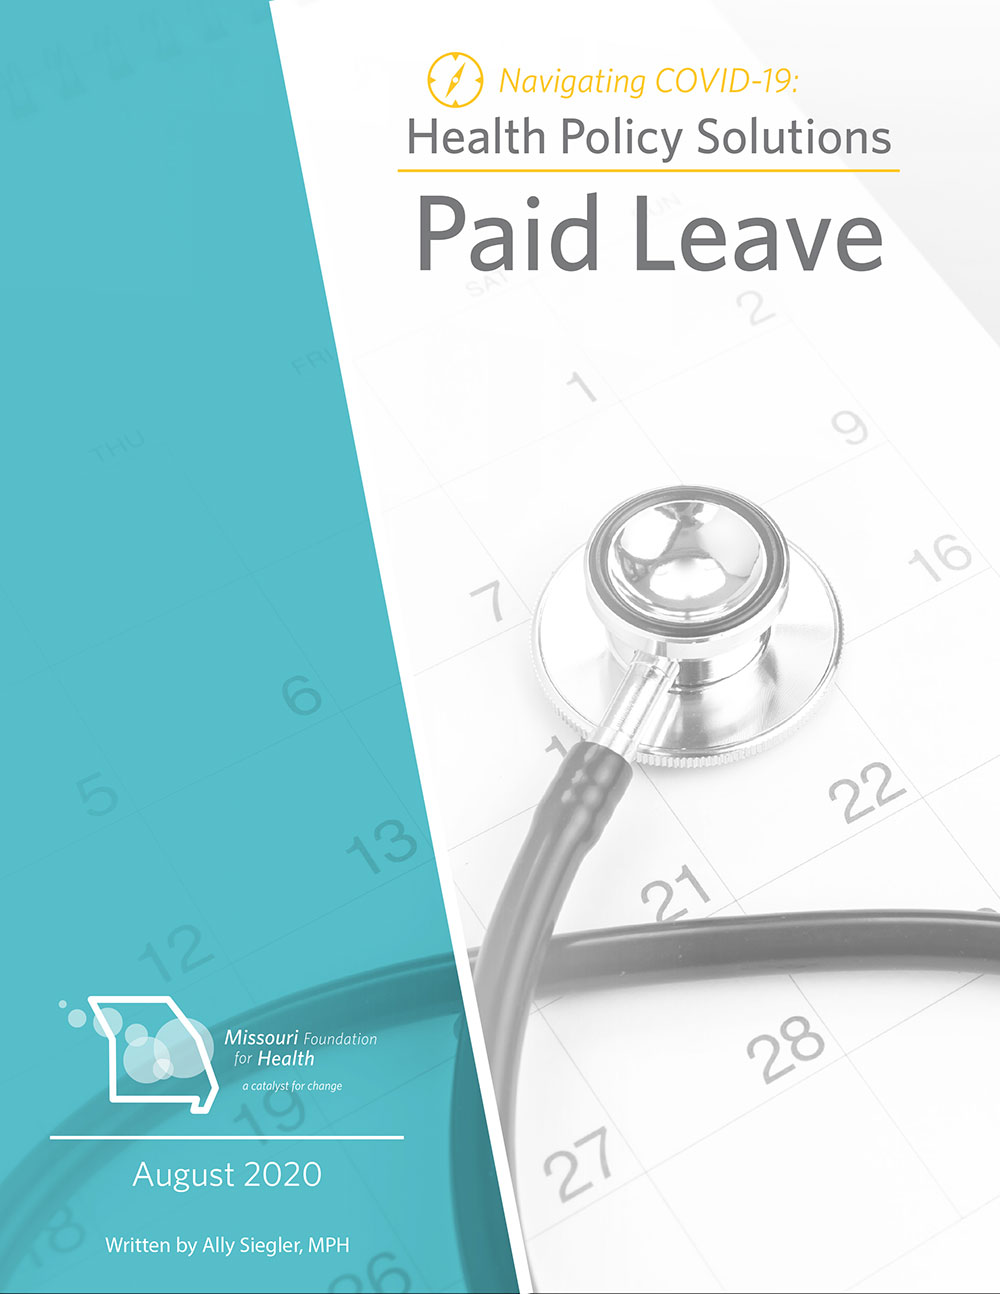 Navigating COVID-19 Healthy Policy Solutions Paid Leave graphic with stethoscope on top of calendar.